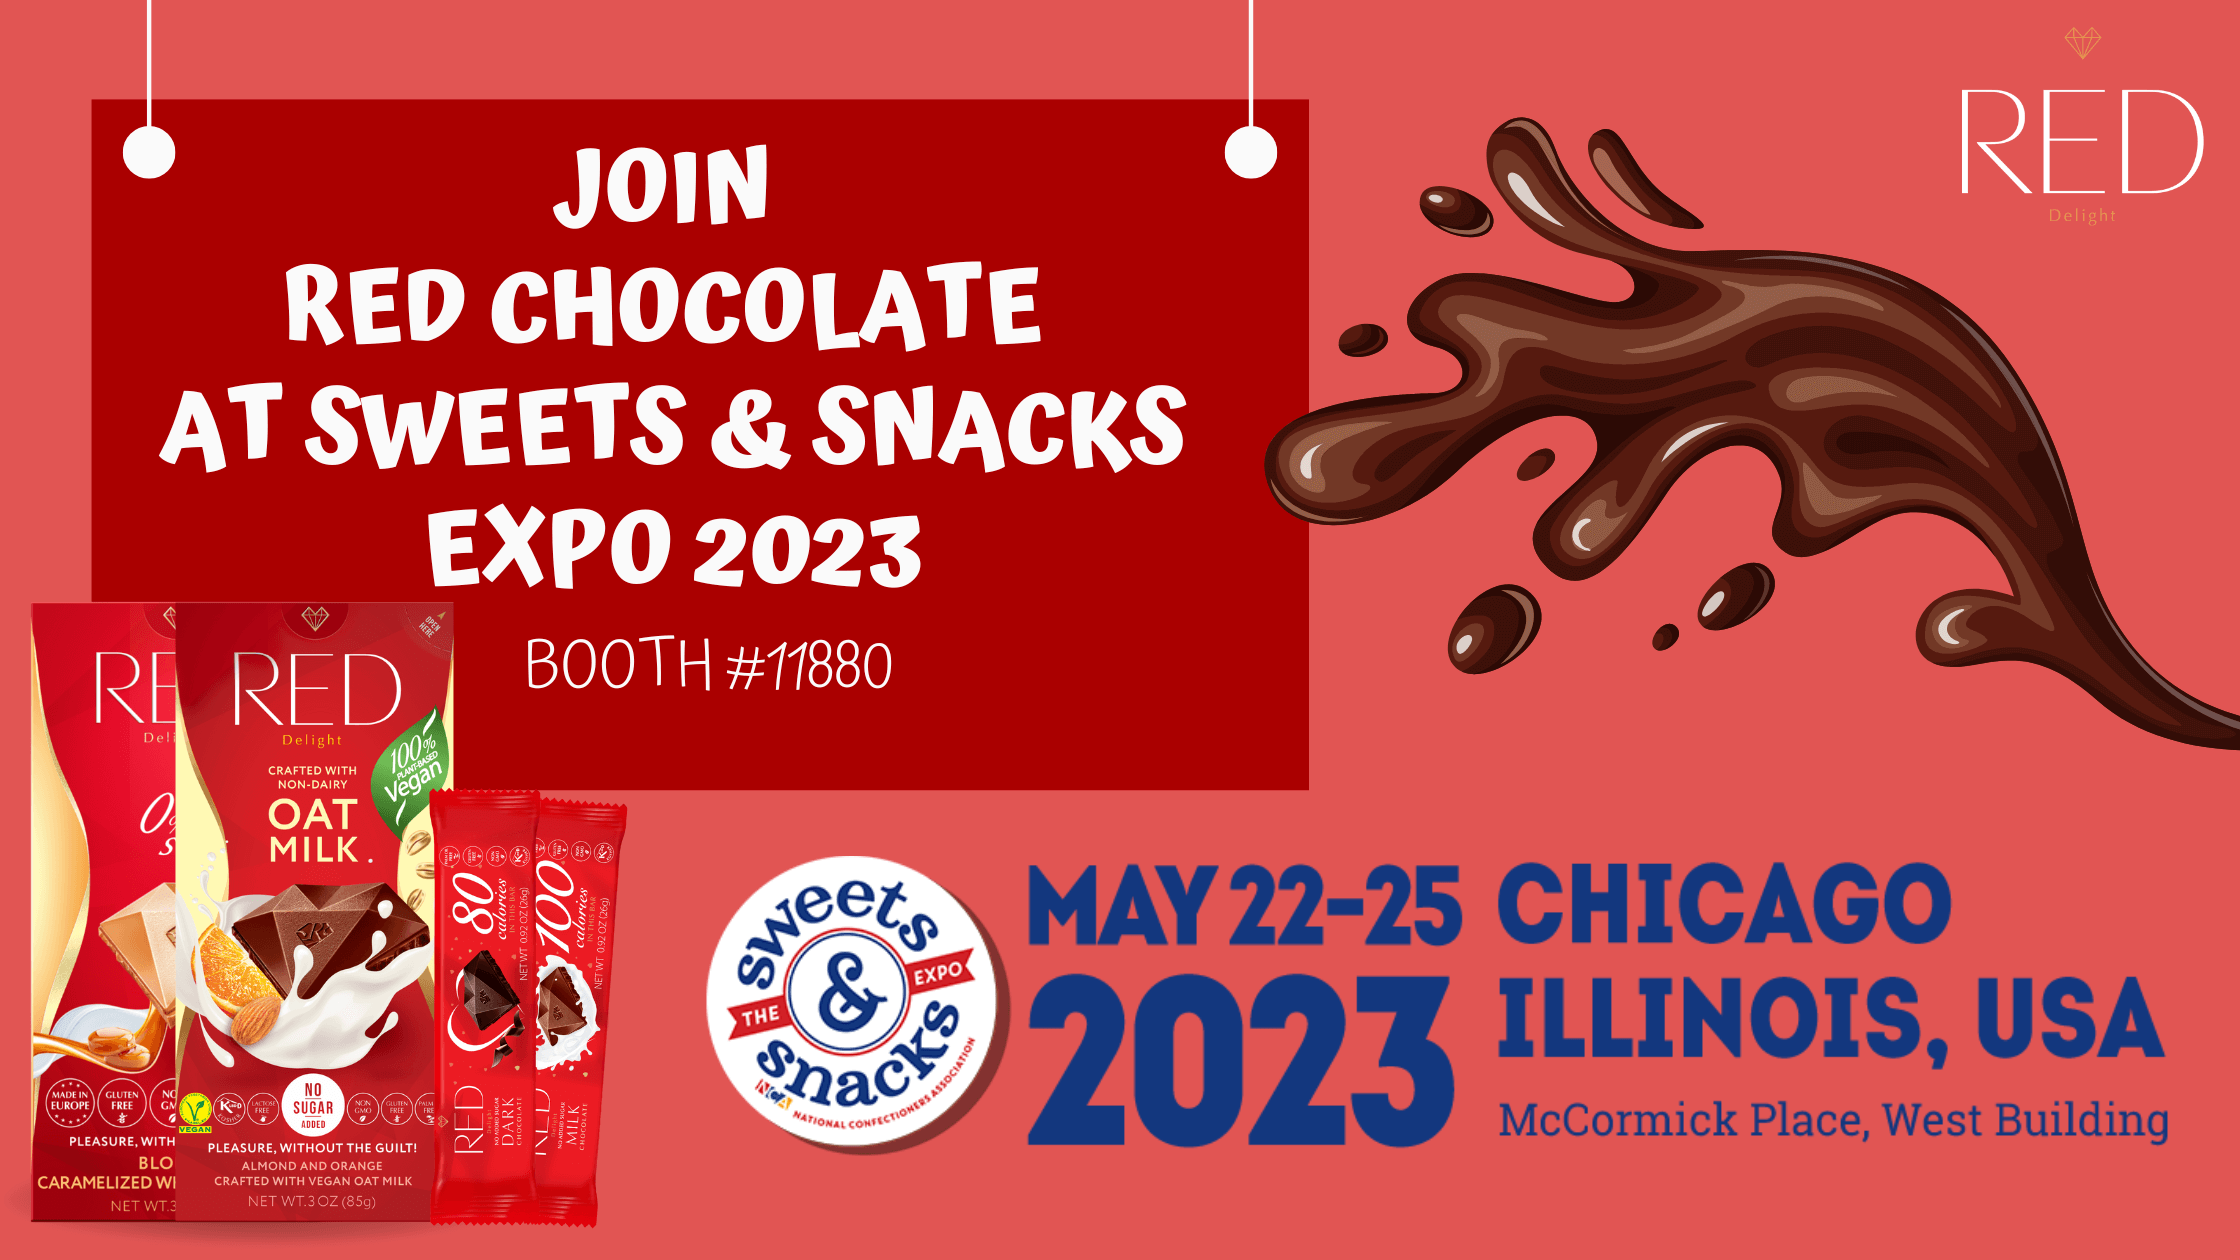 Join RED Chocolate at Sweets & Snacks Expo 2023 RED